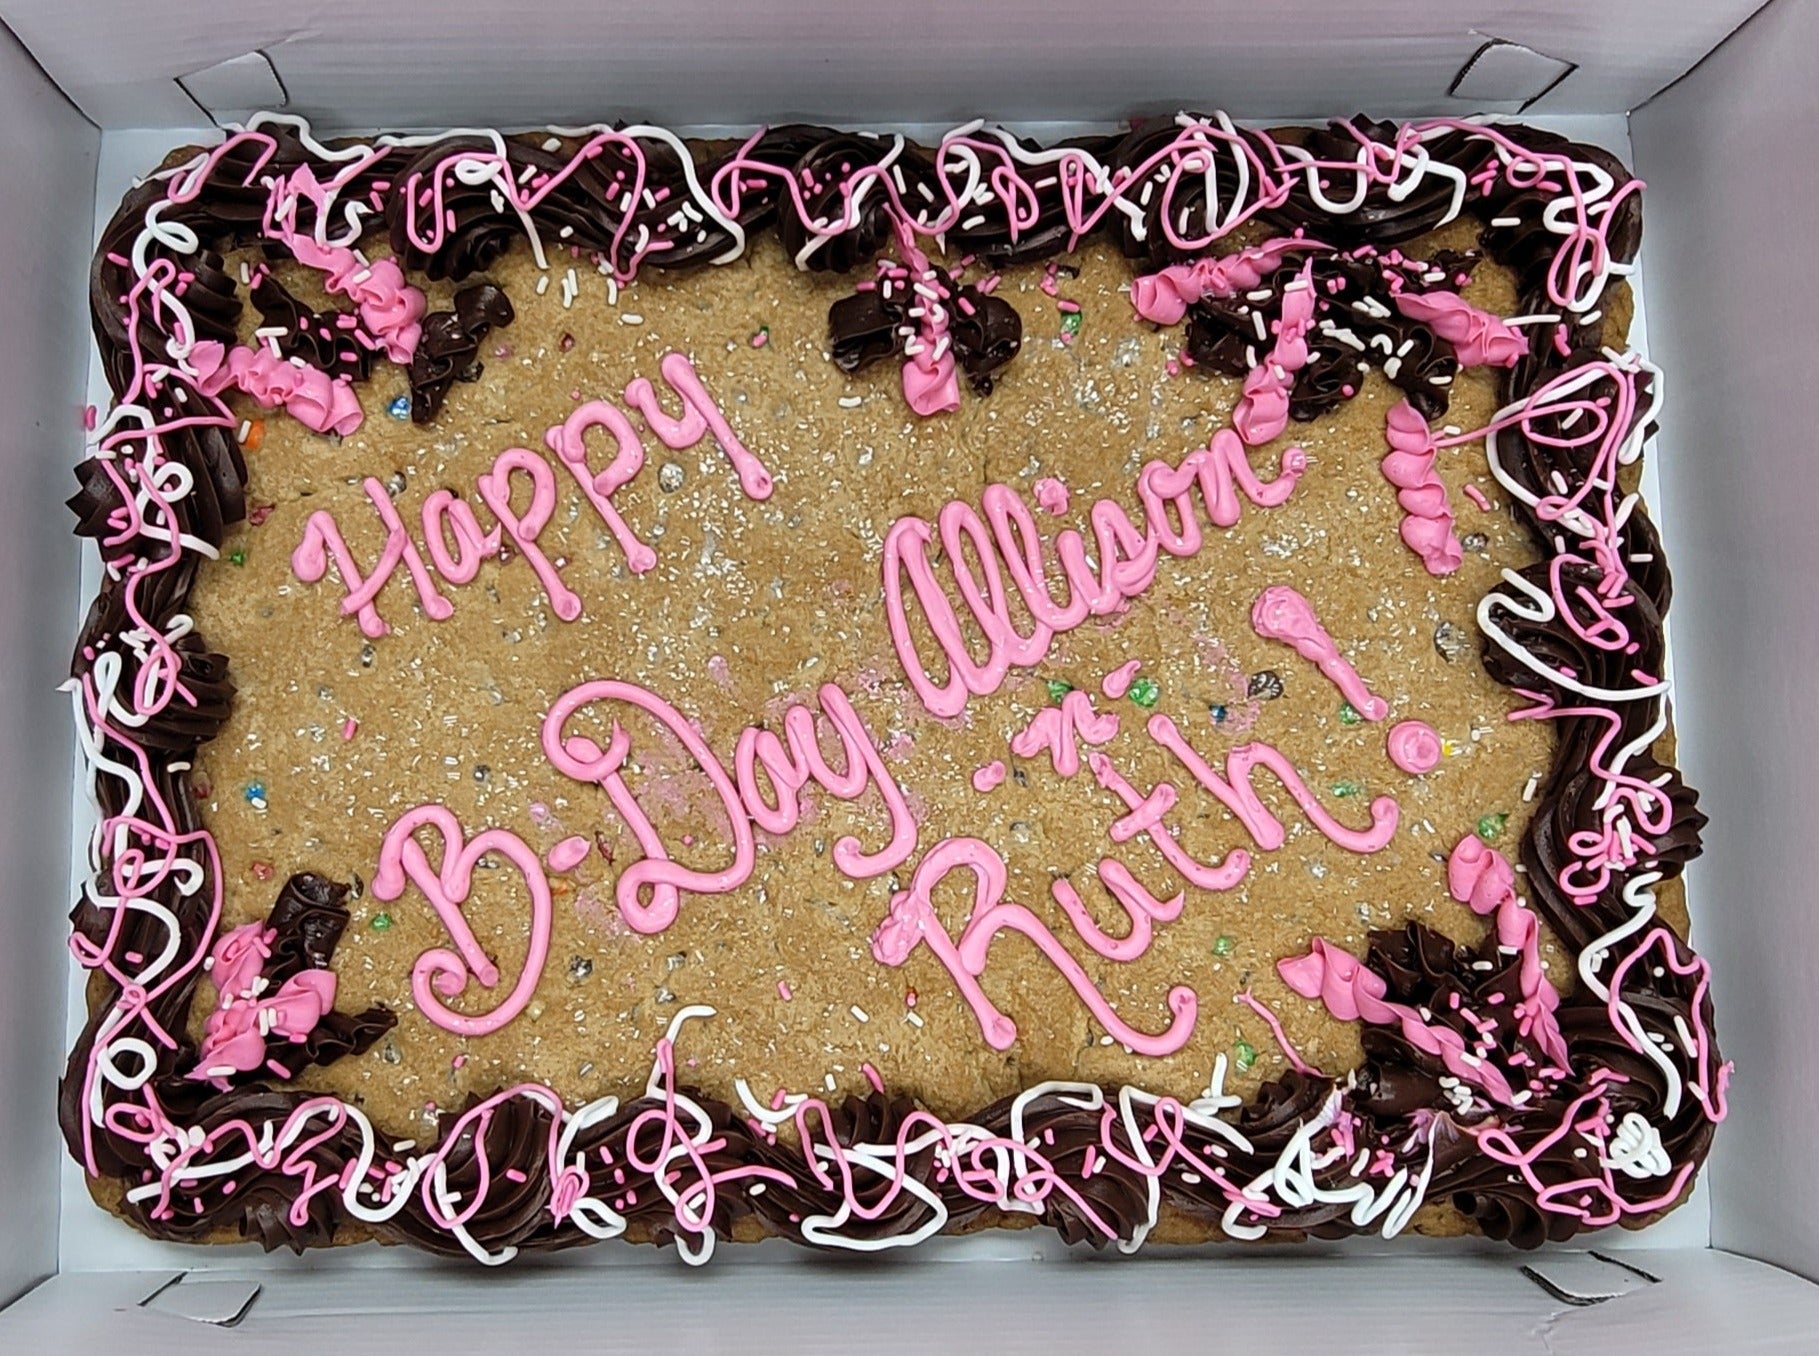 Half-Sheet Cookie Cake with Chocolate Frosting